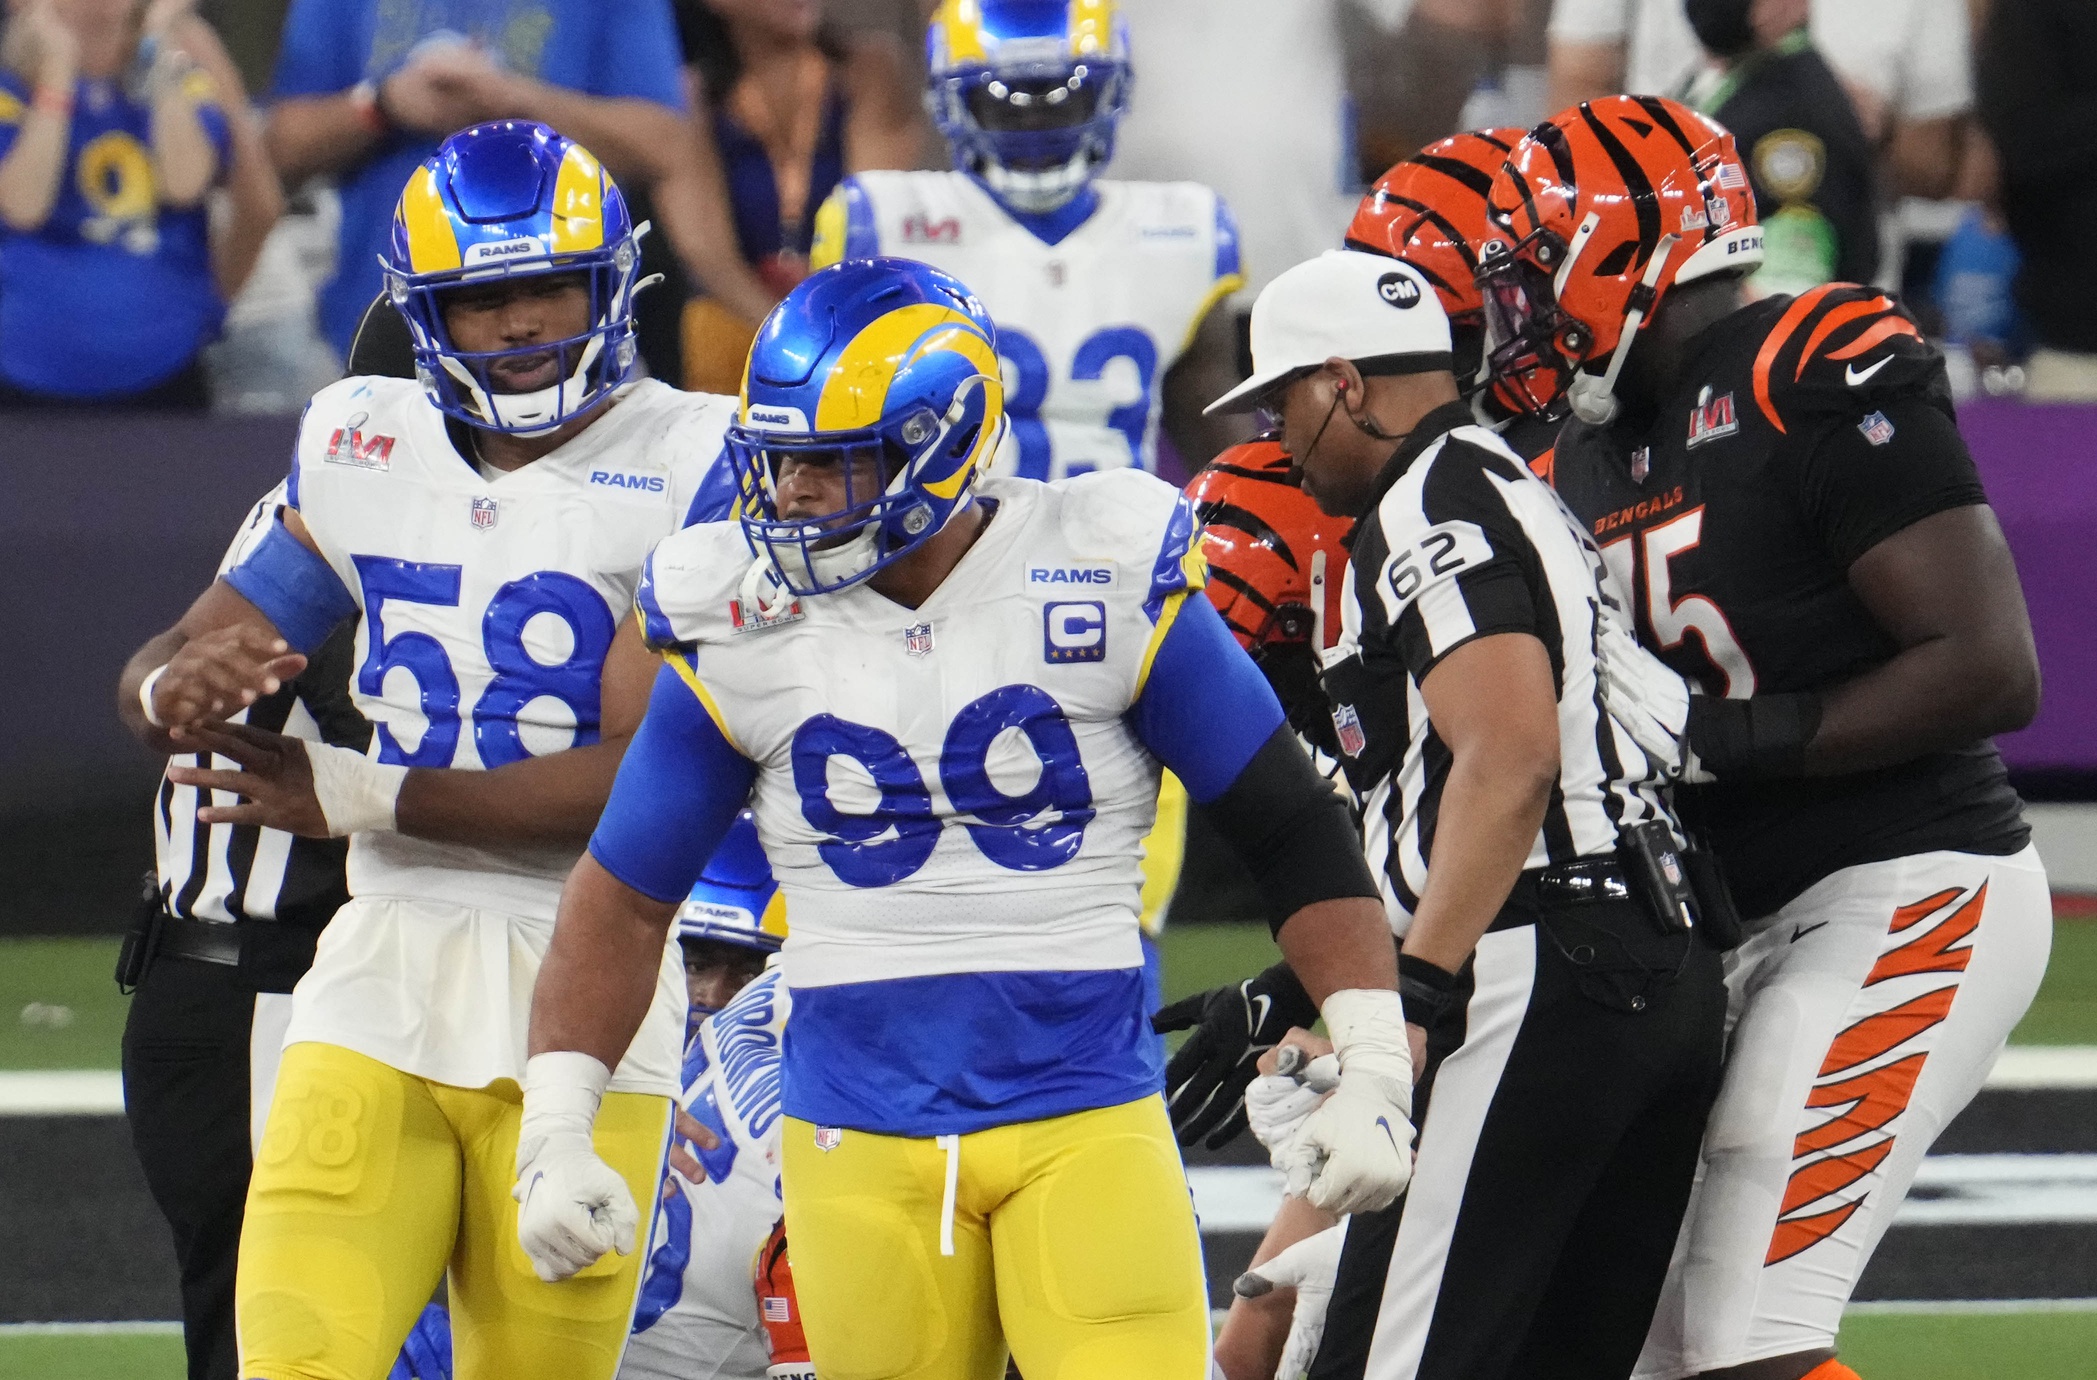 Rams vs. Bengals: Time, TV and streaming info for Week 8